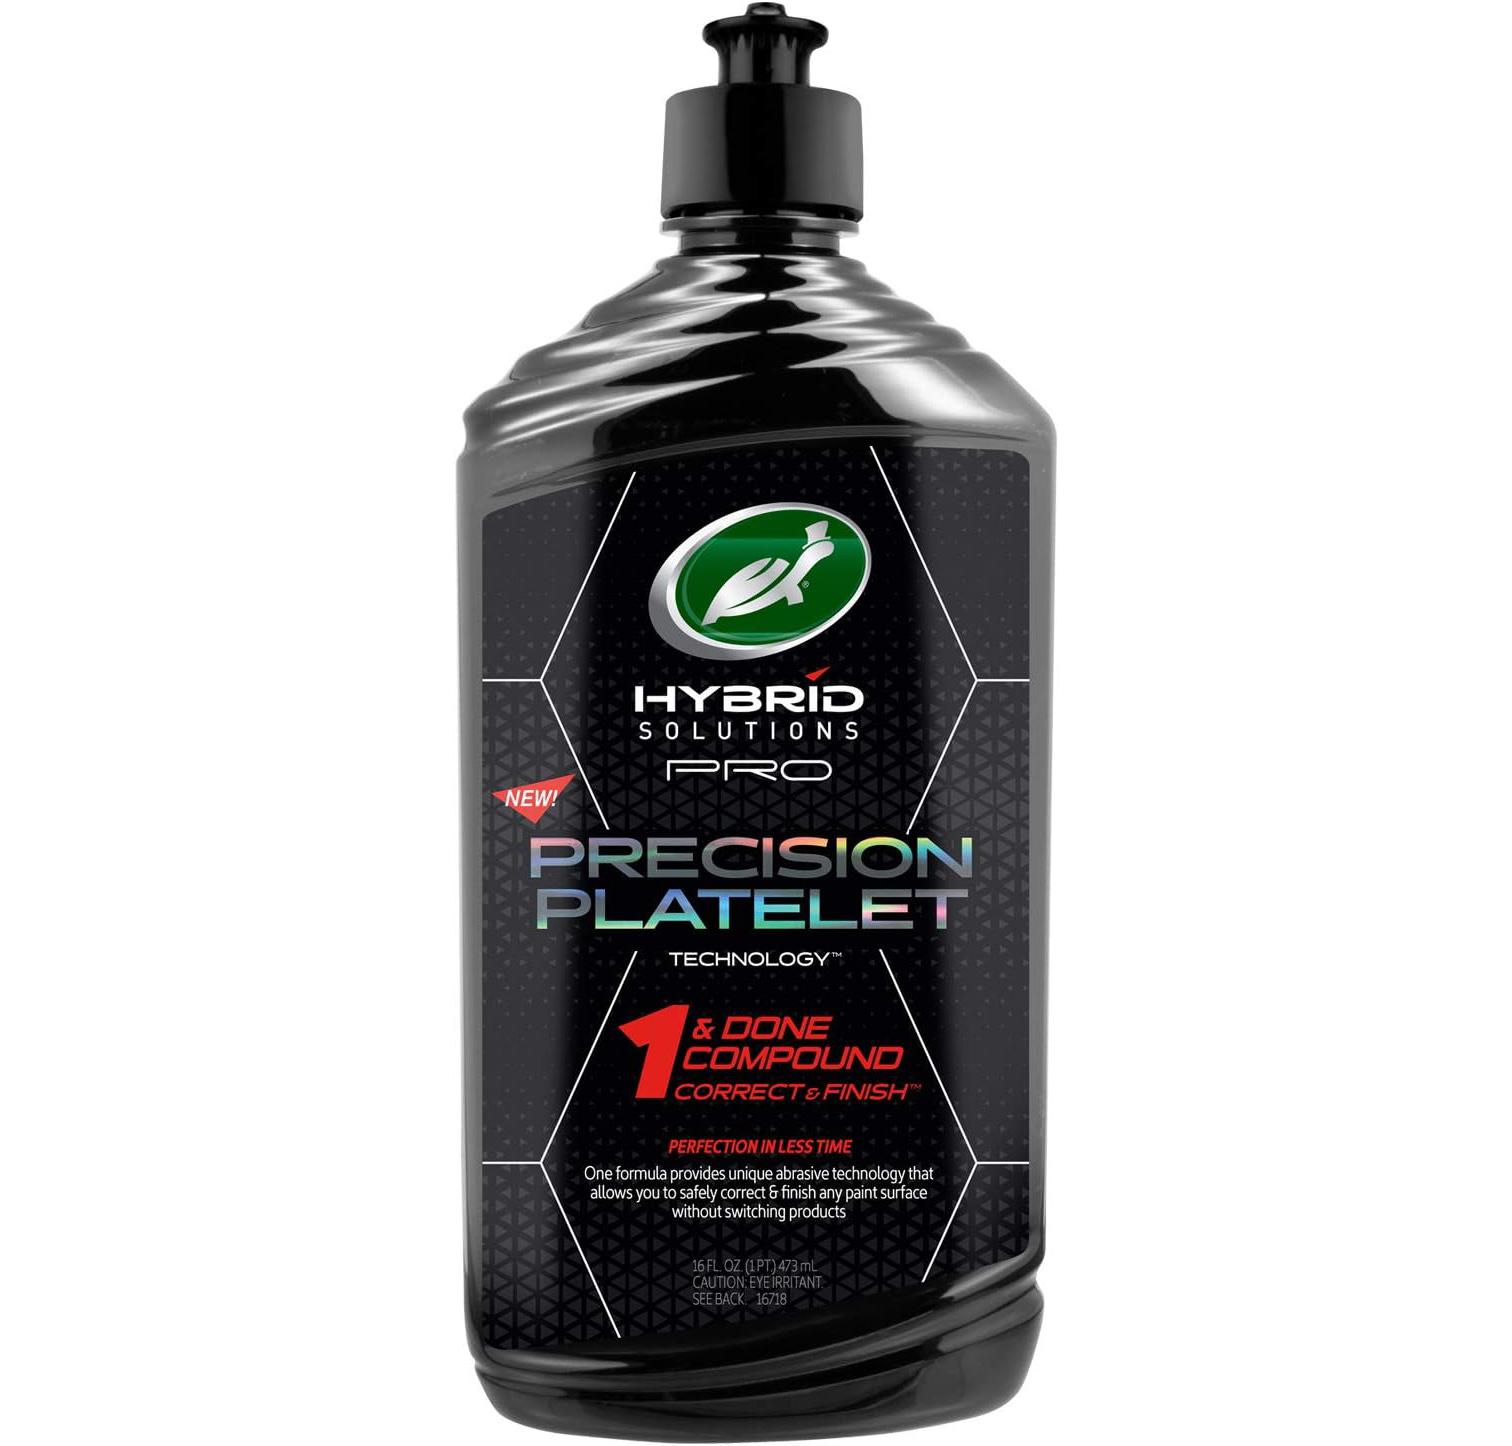 Turtle Wax 53478 Hybrid Solutions Pro 1 and Done Compound Correct and Finish for $14.